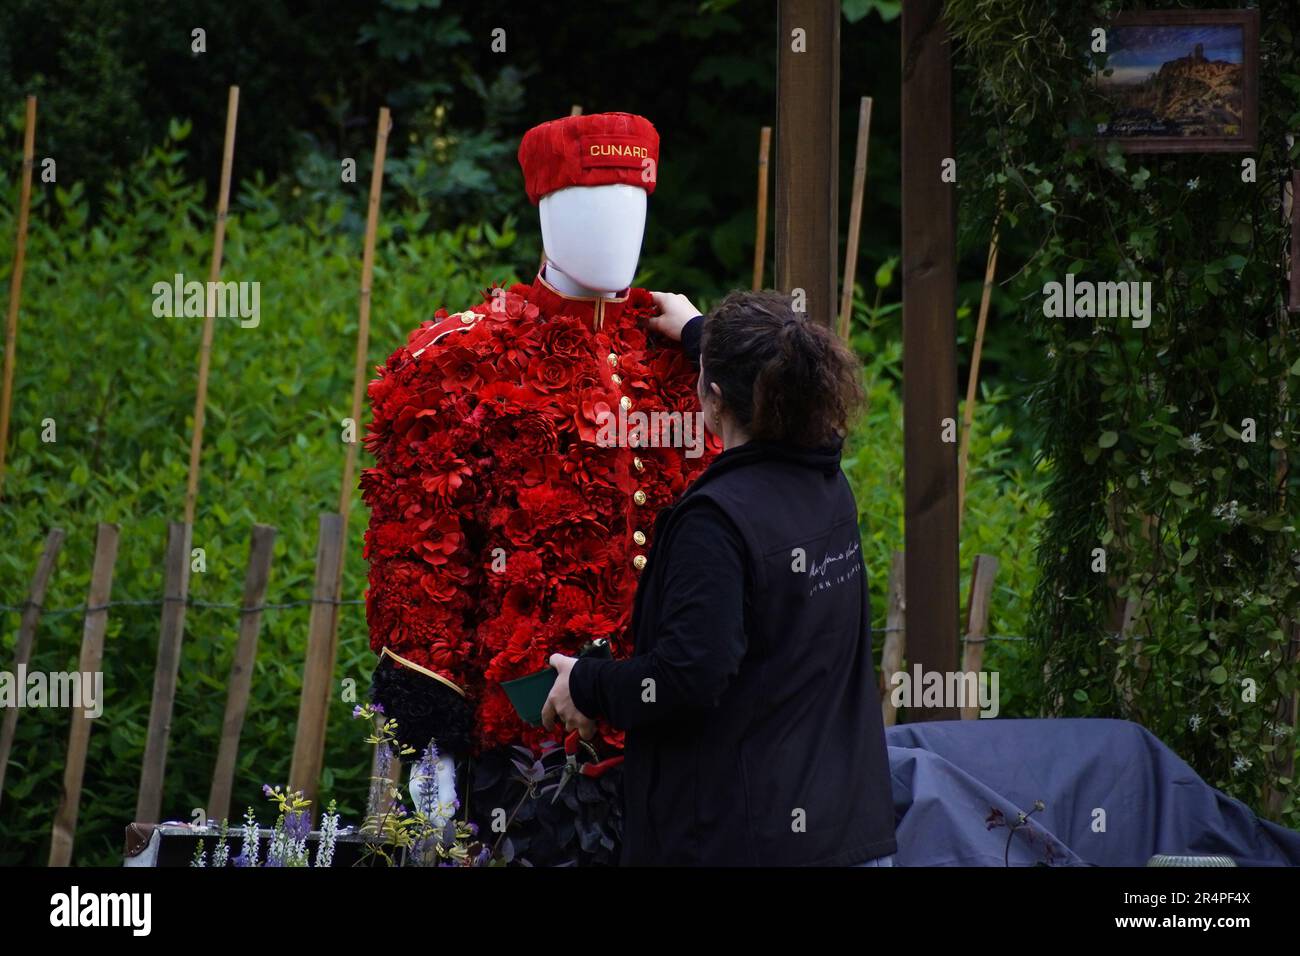 Images of Poppies taken at the Chelsea Flower Show 2023, from the floral displays to the Chelsea Pensioner tribute manikin of flowers Stock Photo